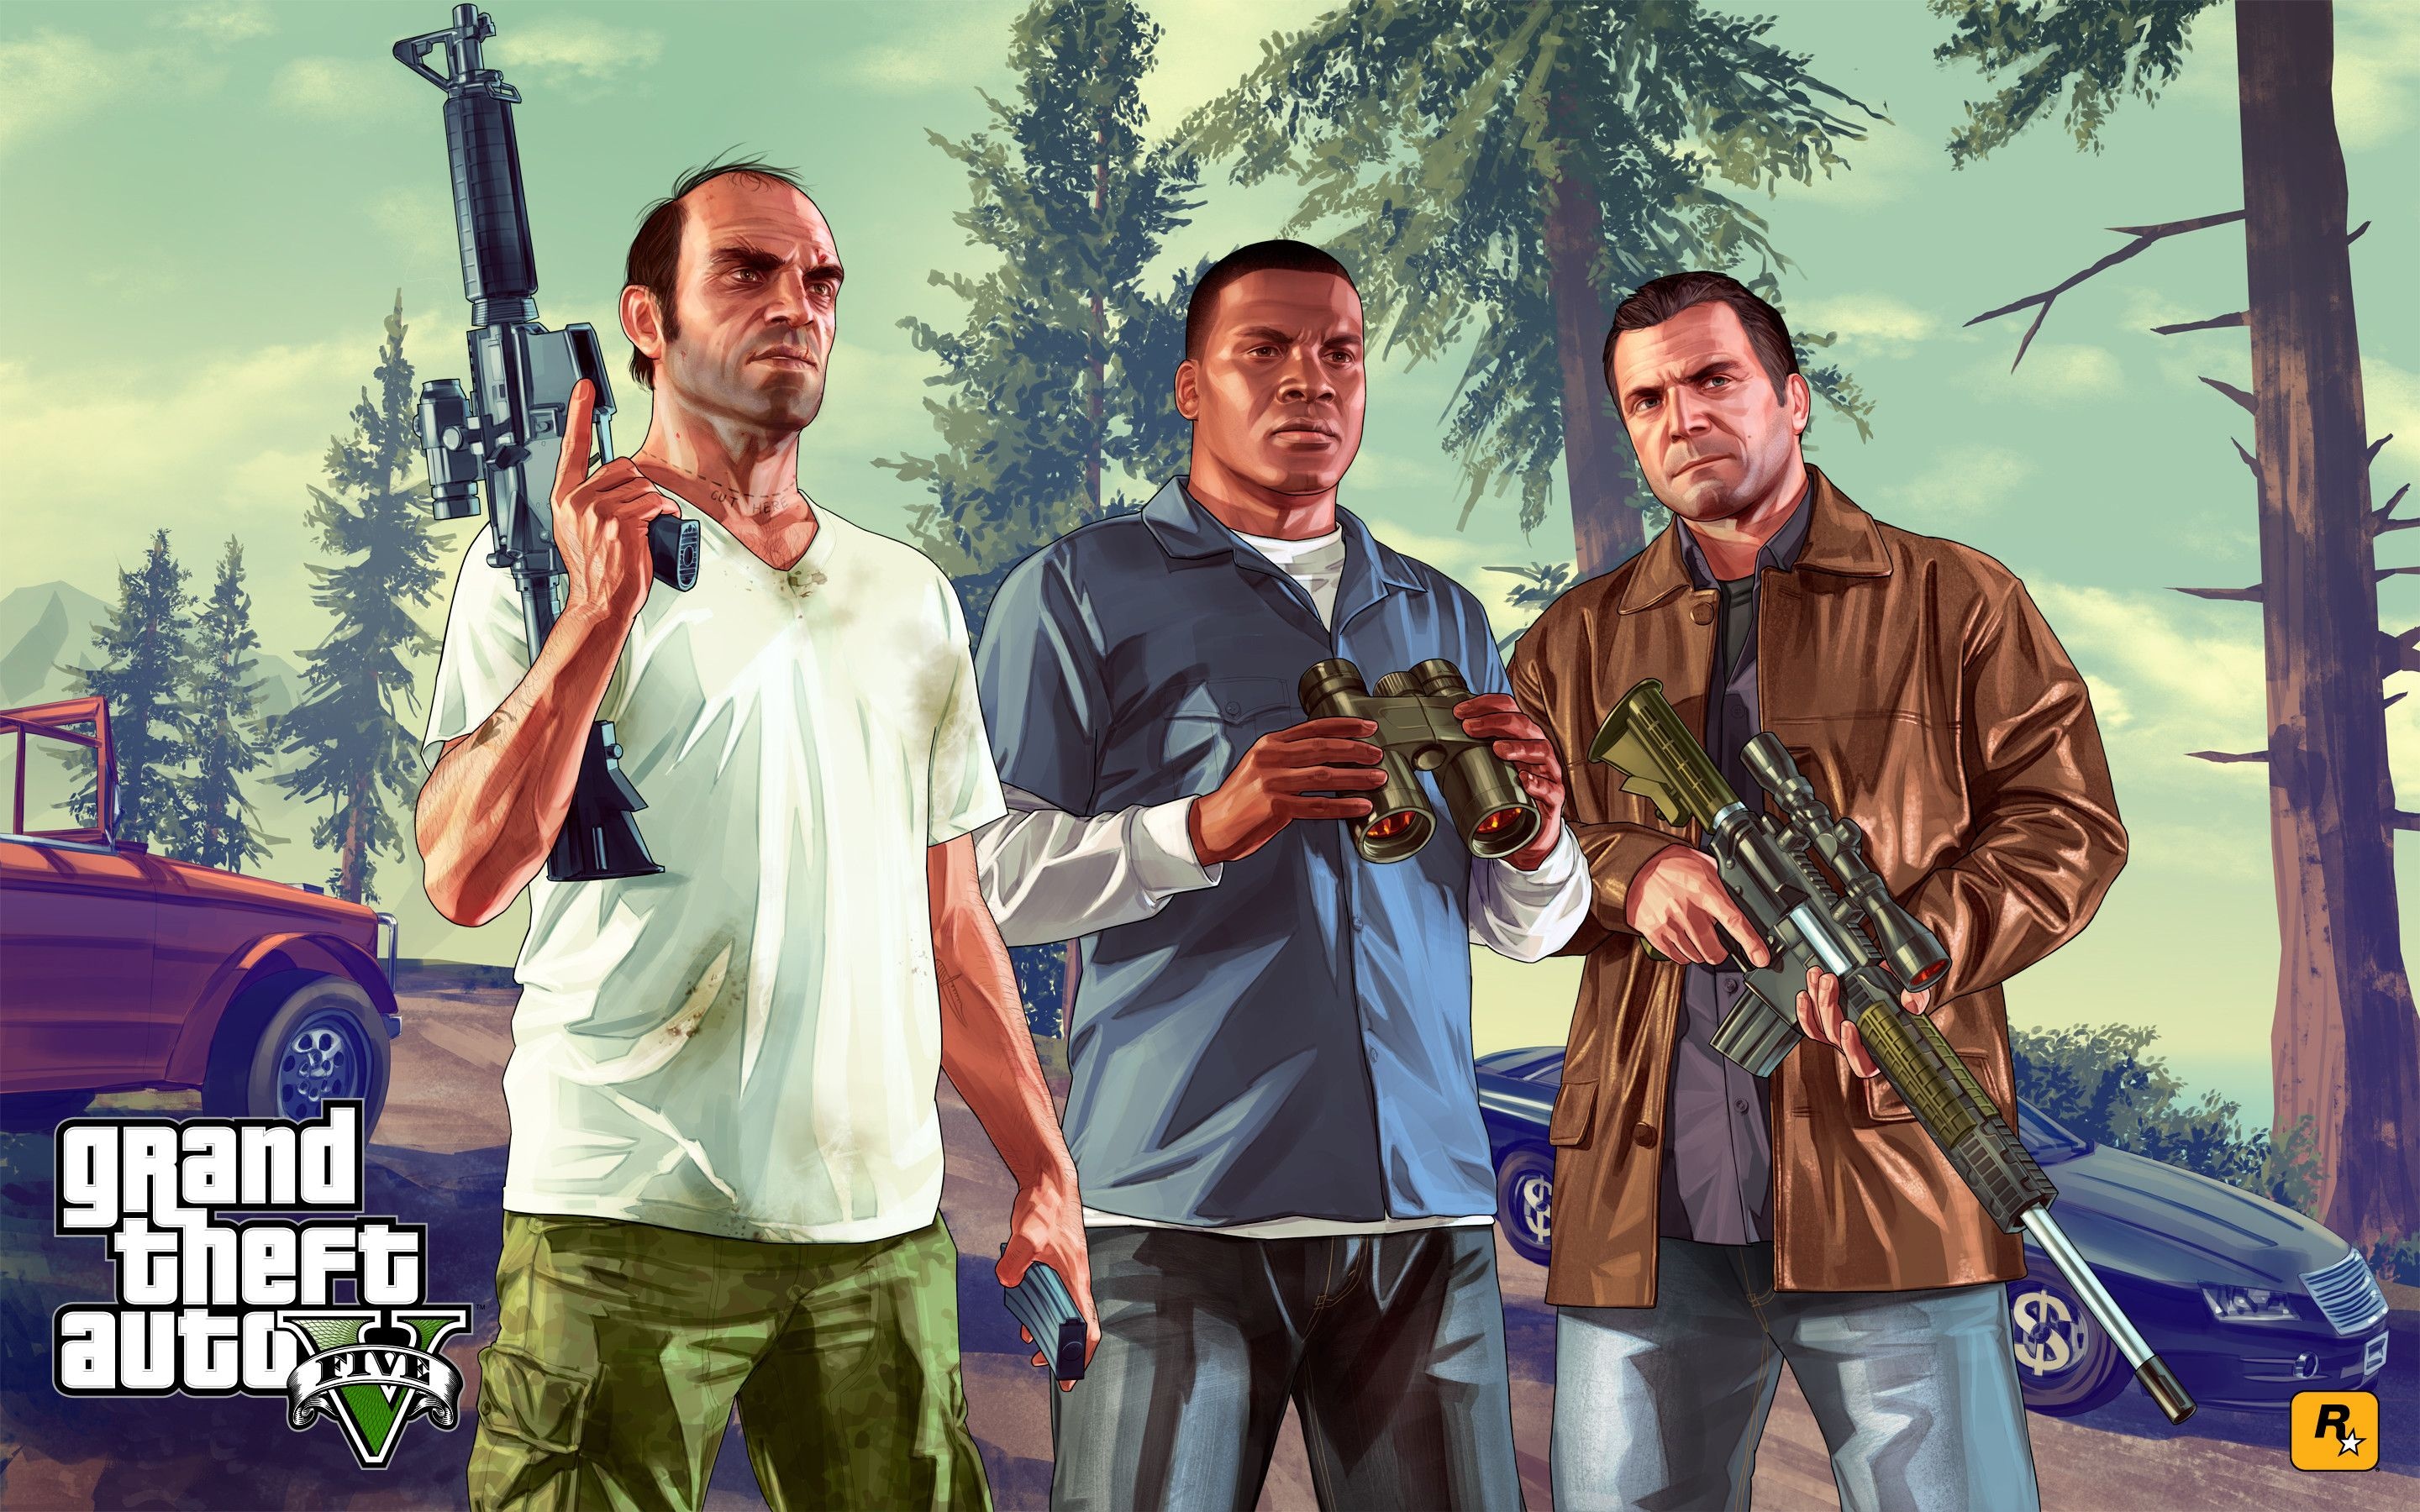 GTA 5 wallpapers, Exciting gameplay, Thrilling action, Iconic characters, 2880x1800 HD Desktop